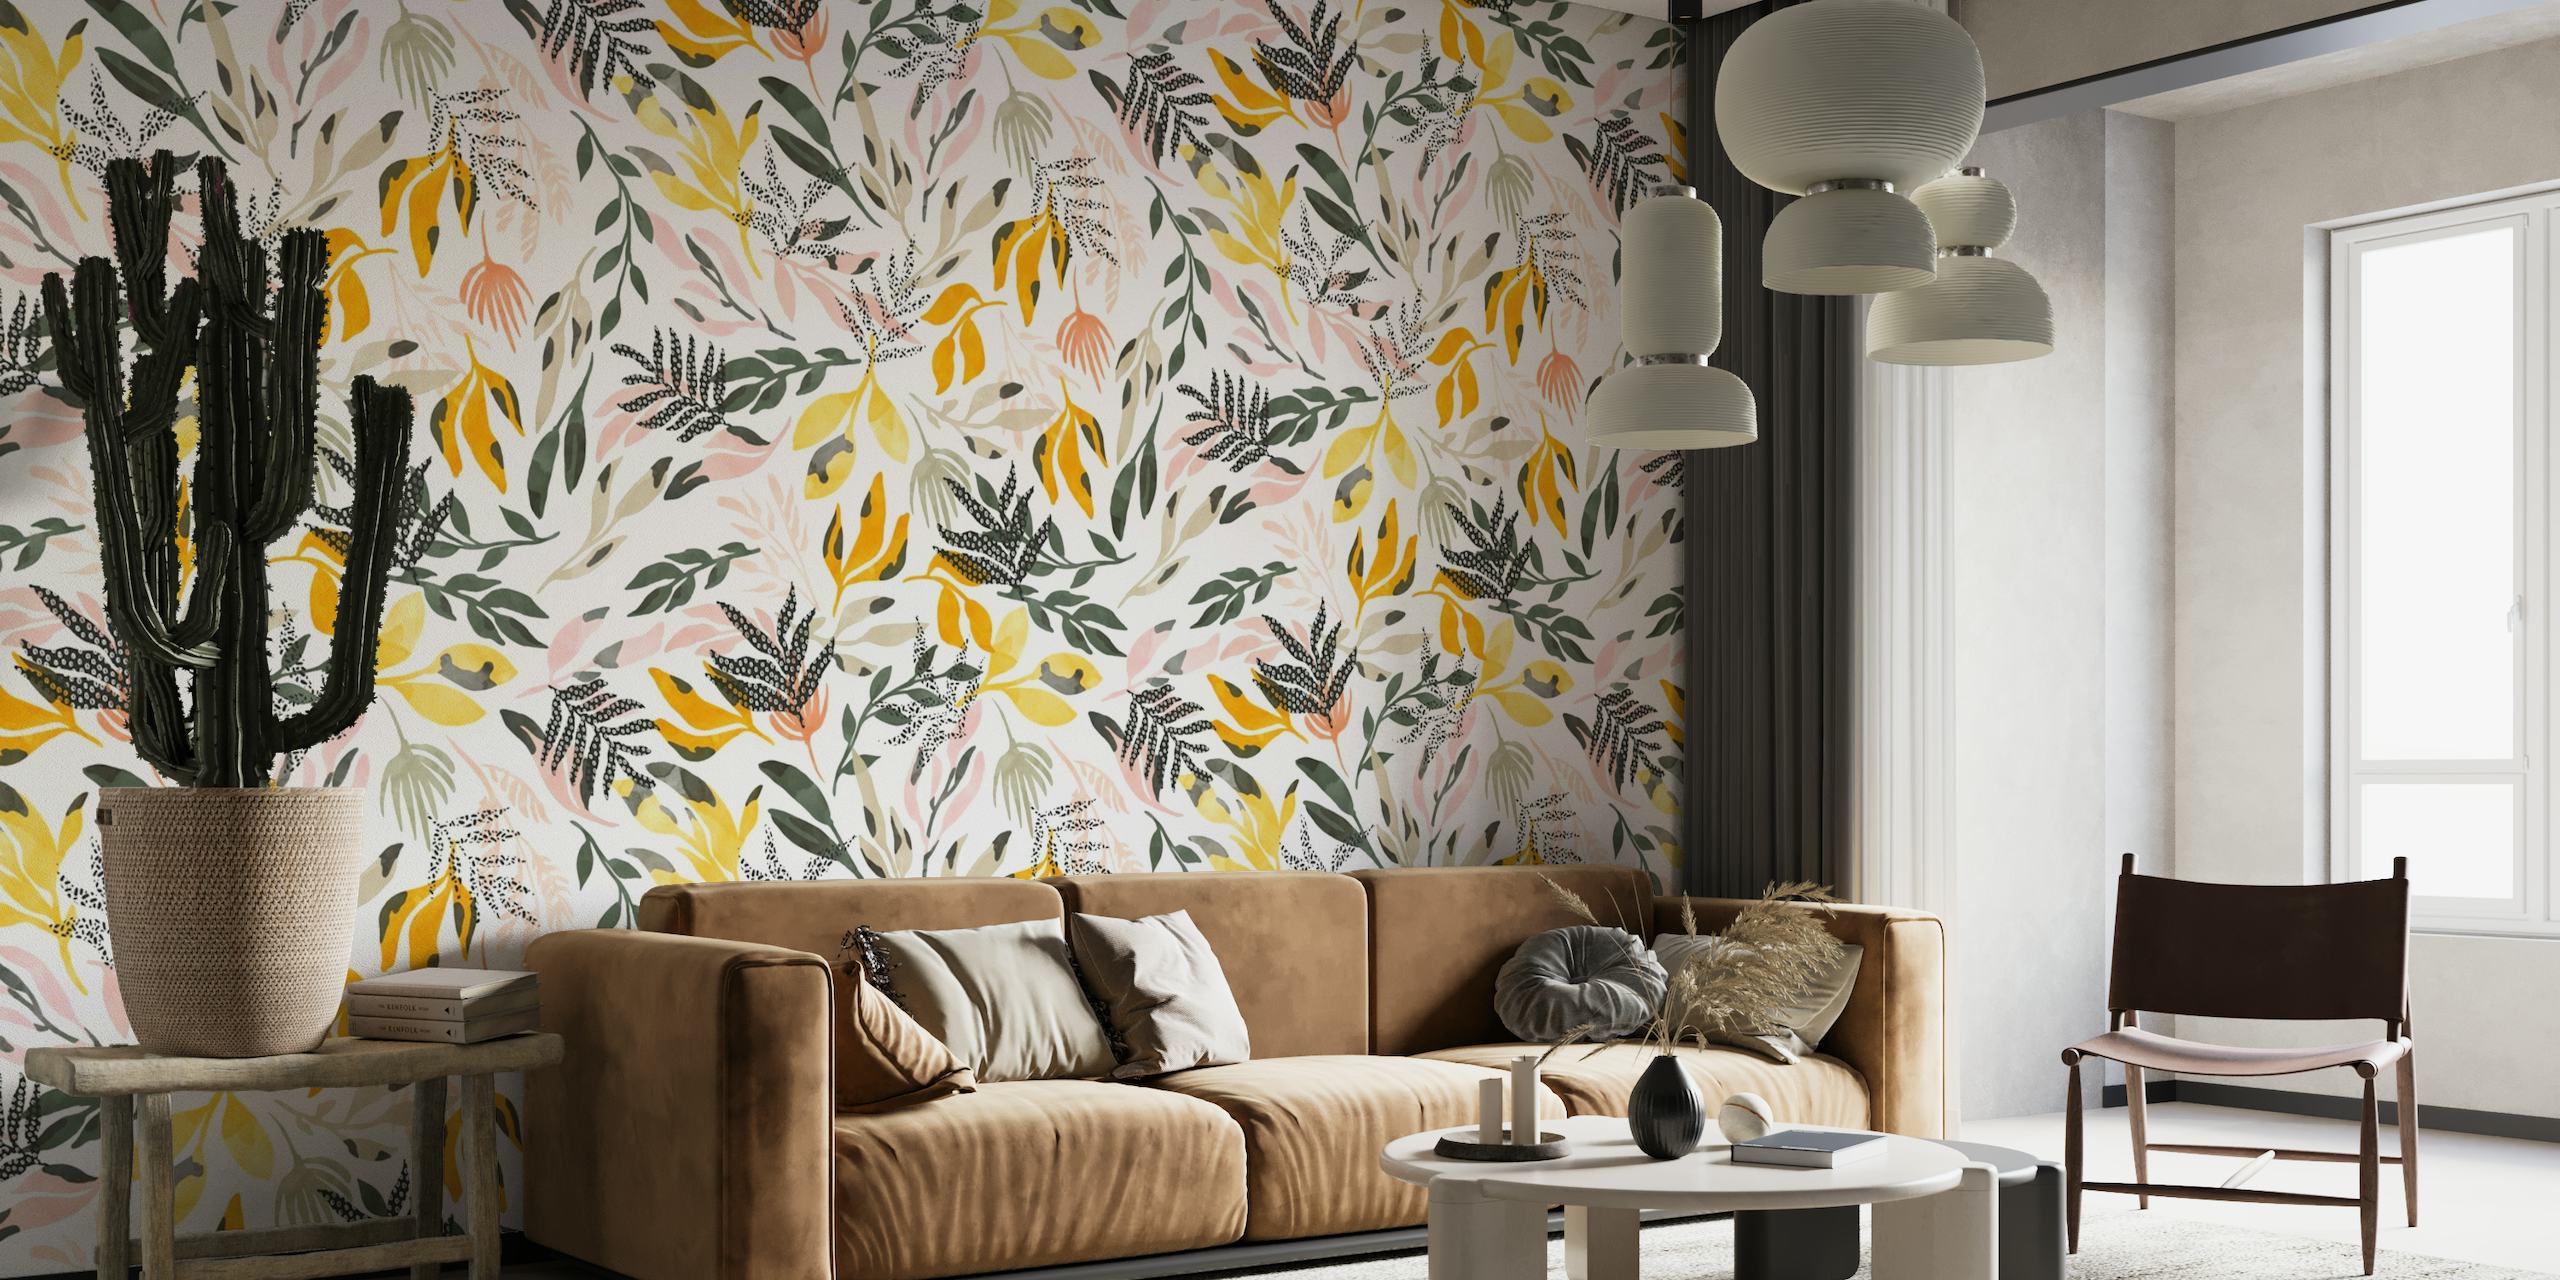 Colorful abstract wall mural with modern nature-inspired design